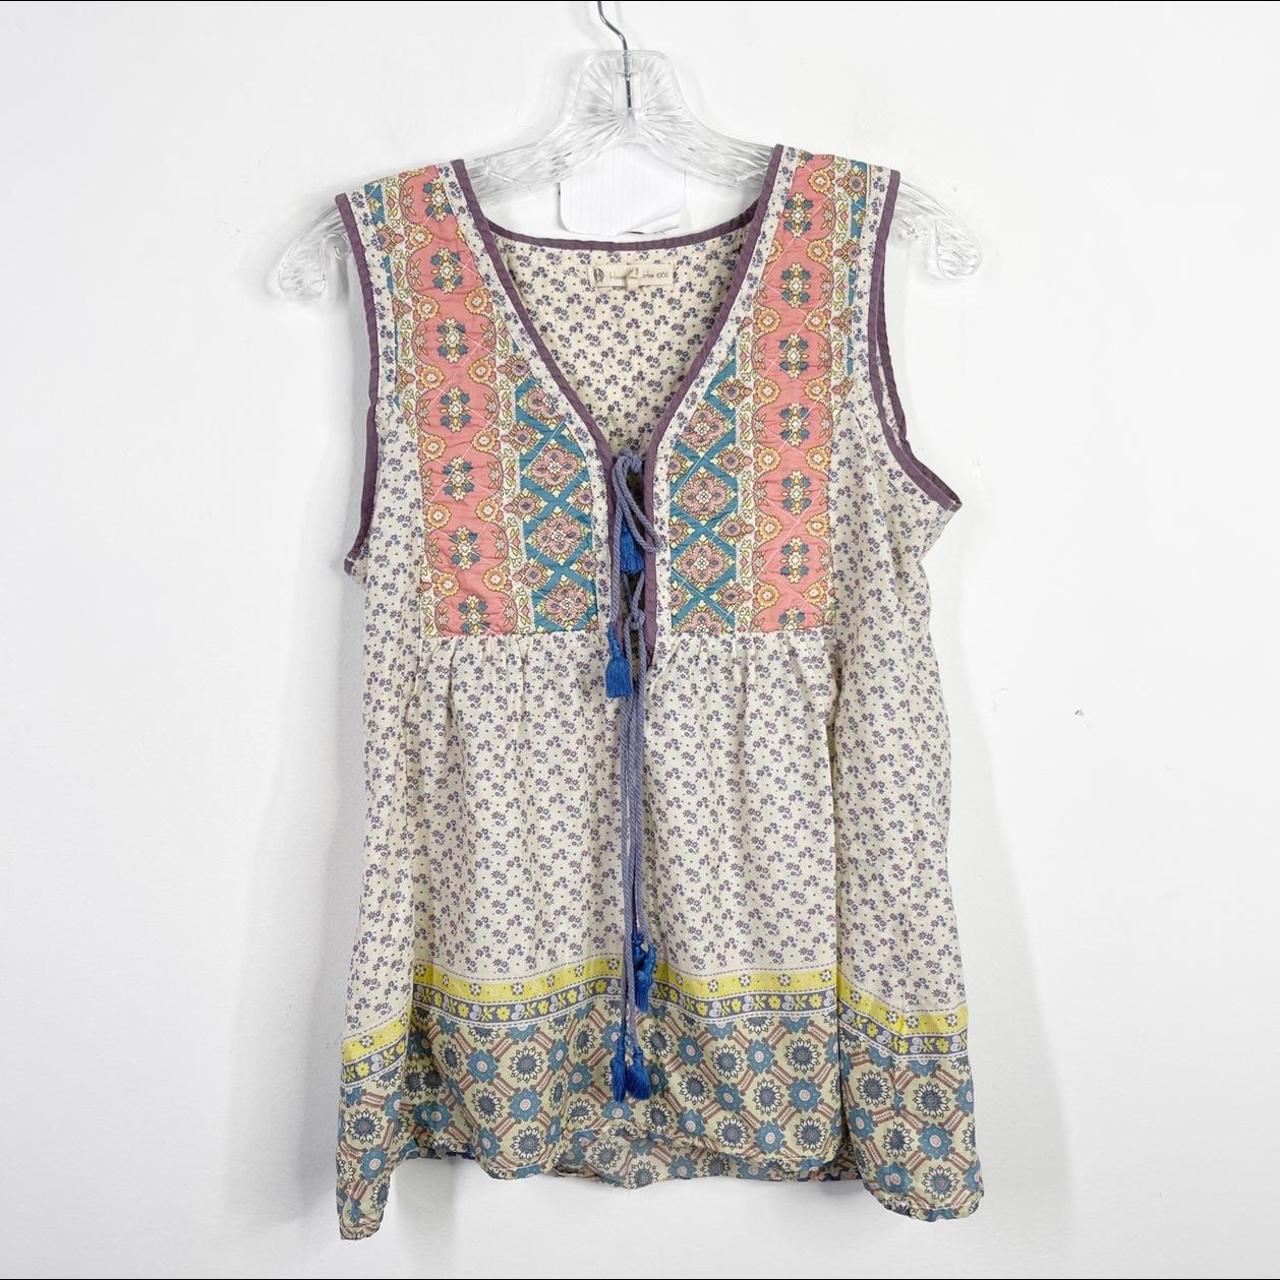 Product Image 1 - Great tank from House of